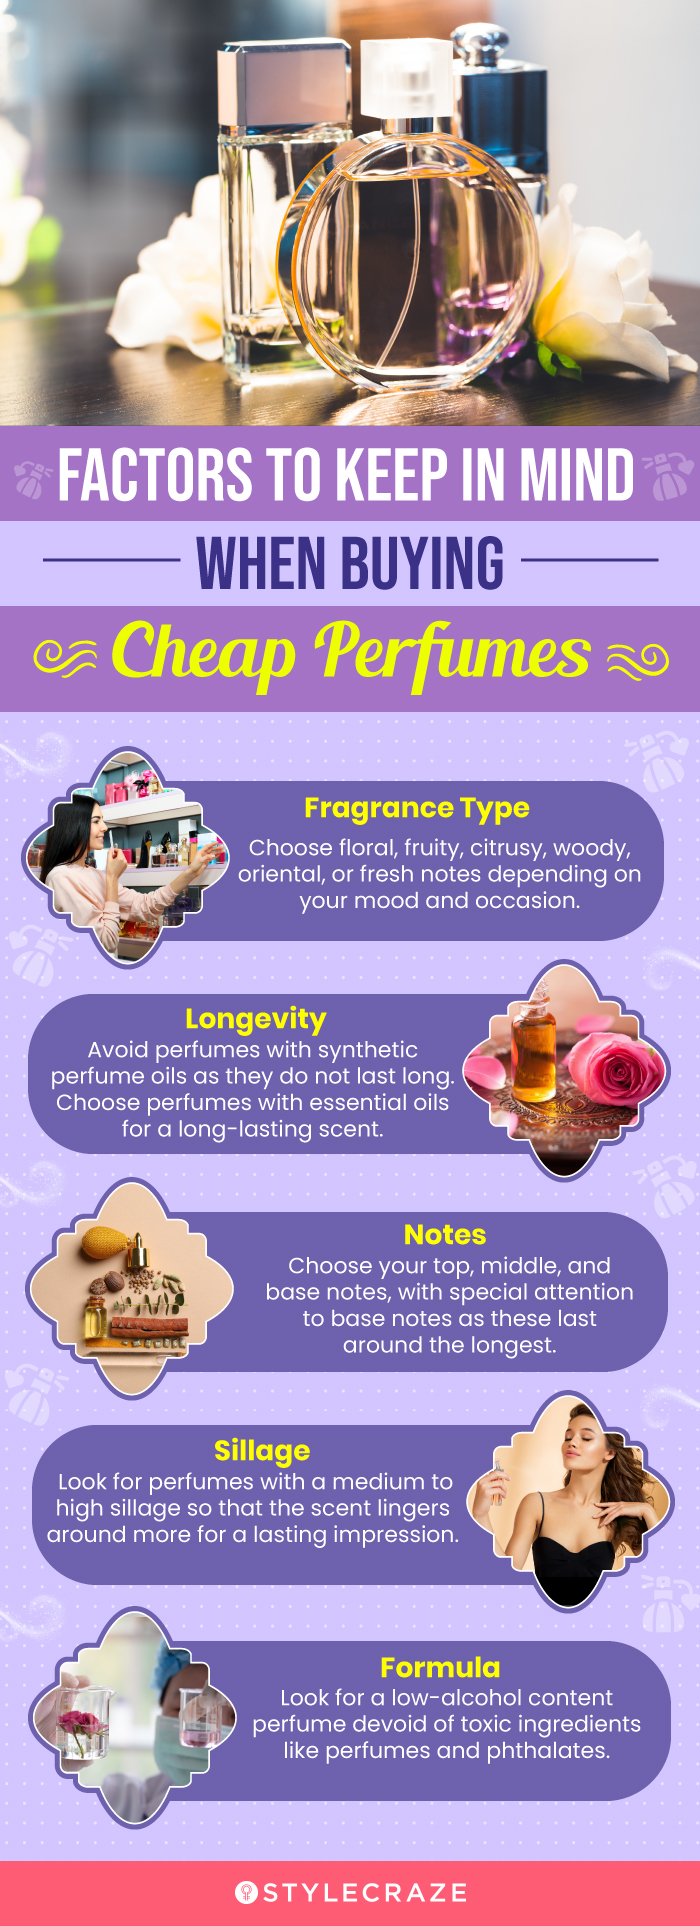 Factors To Keep In Mind When Buying Cheap Perfumes (infographic)